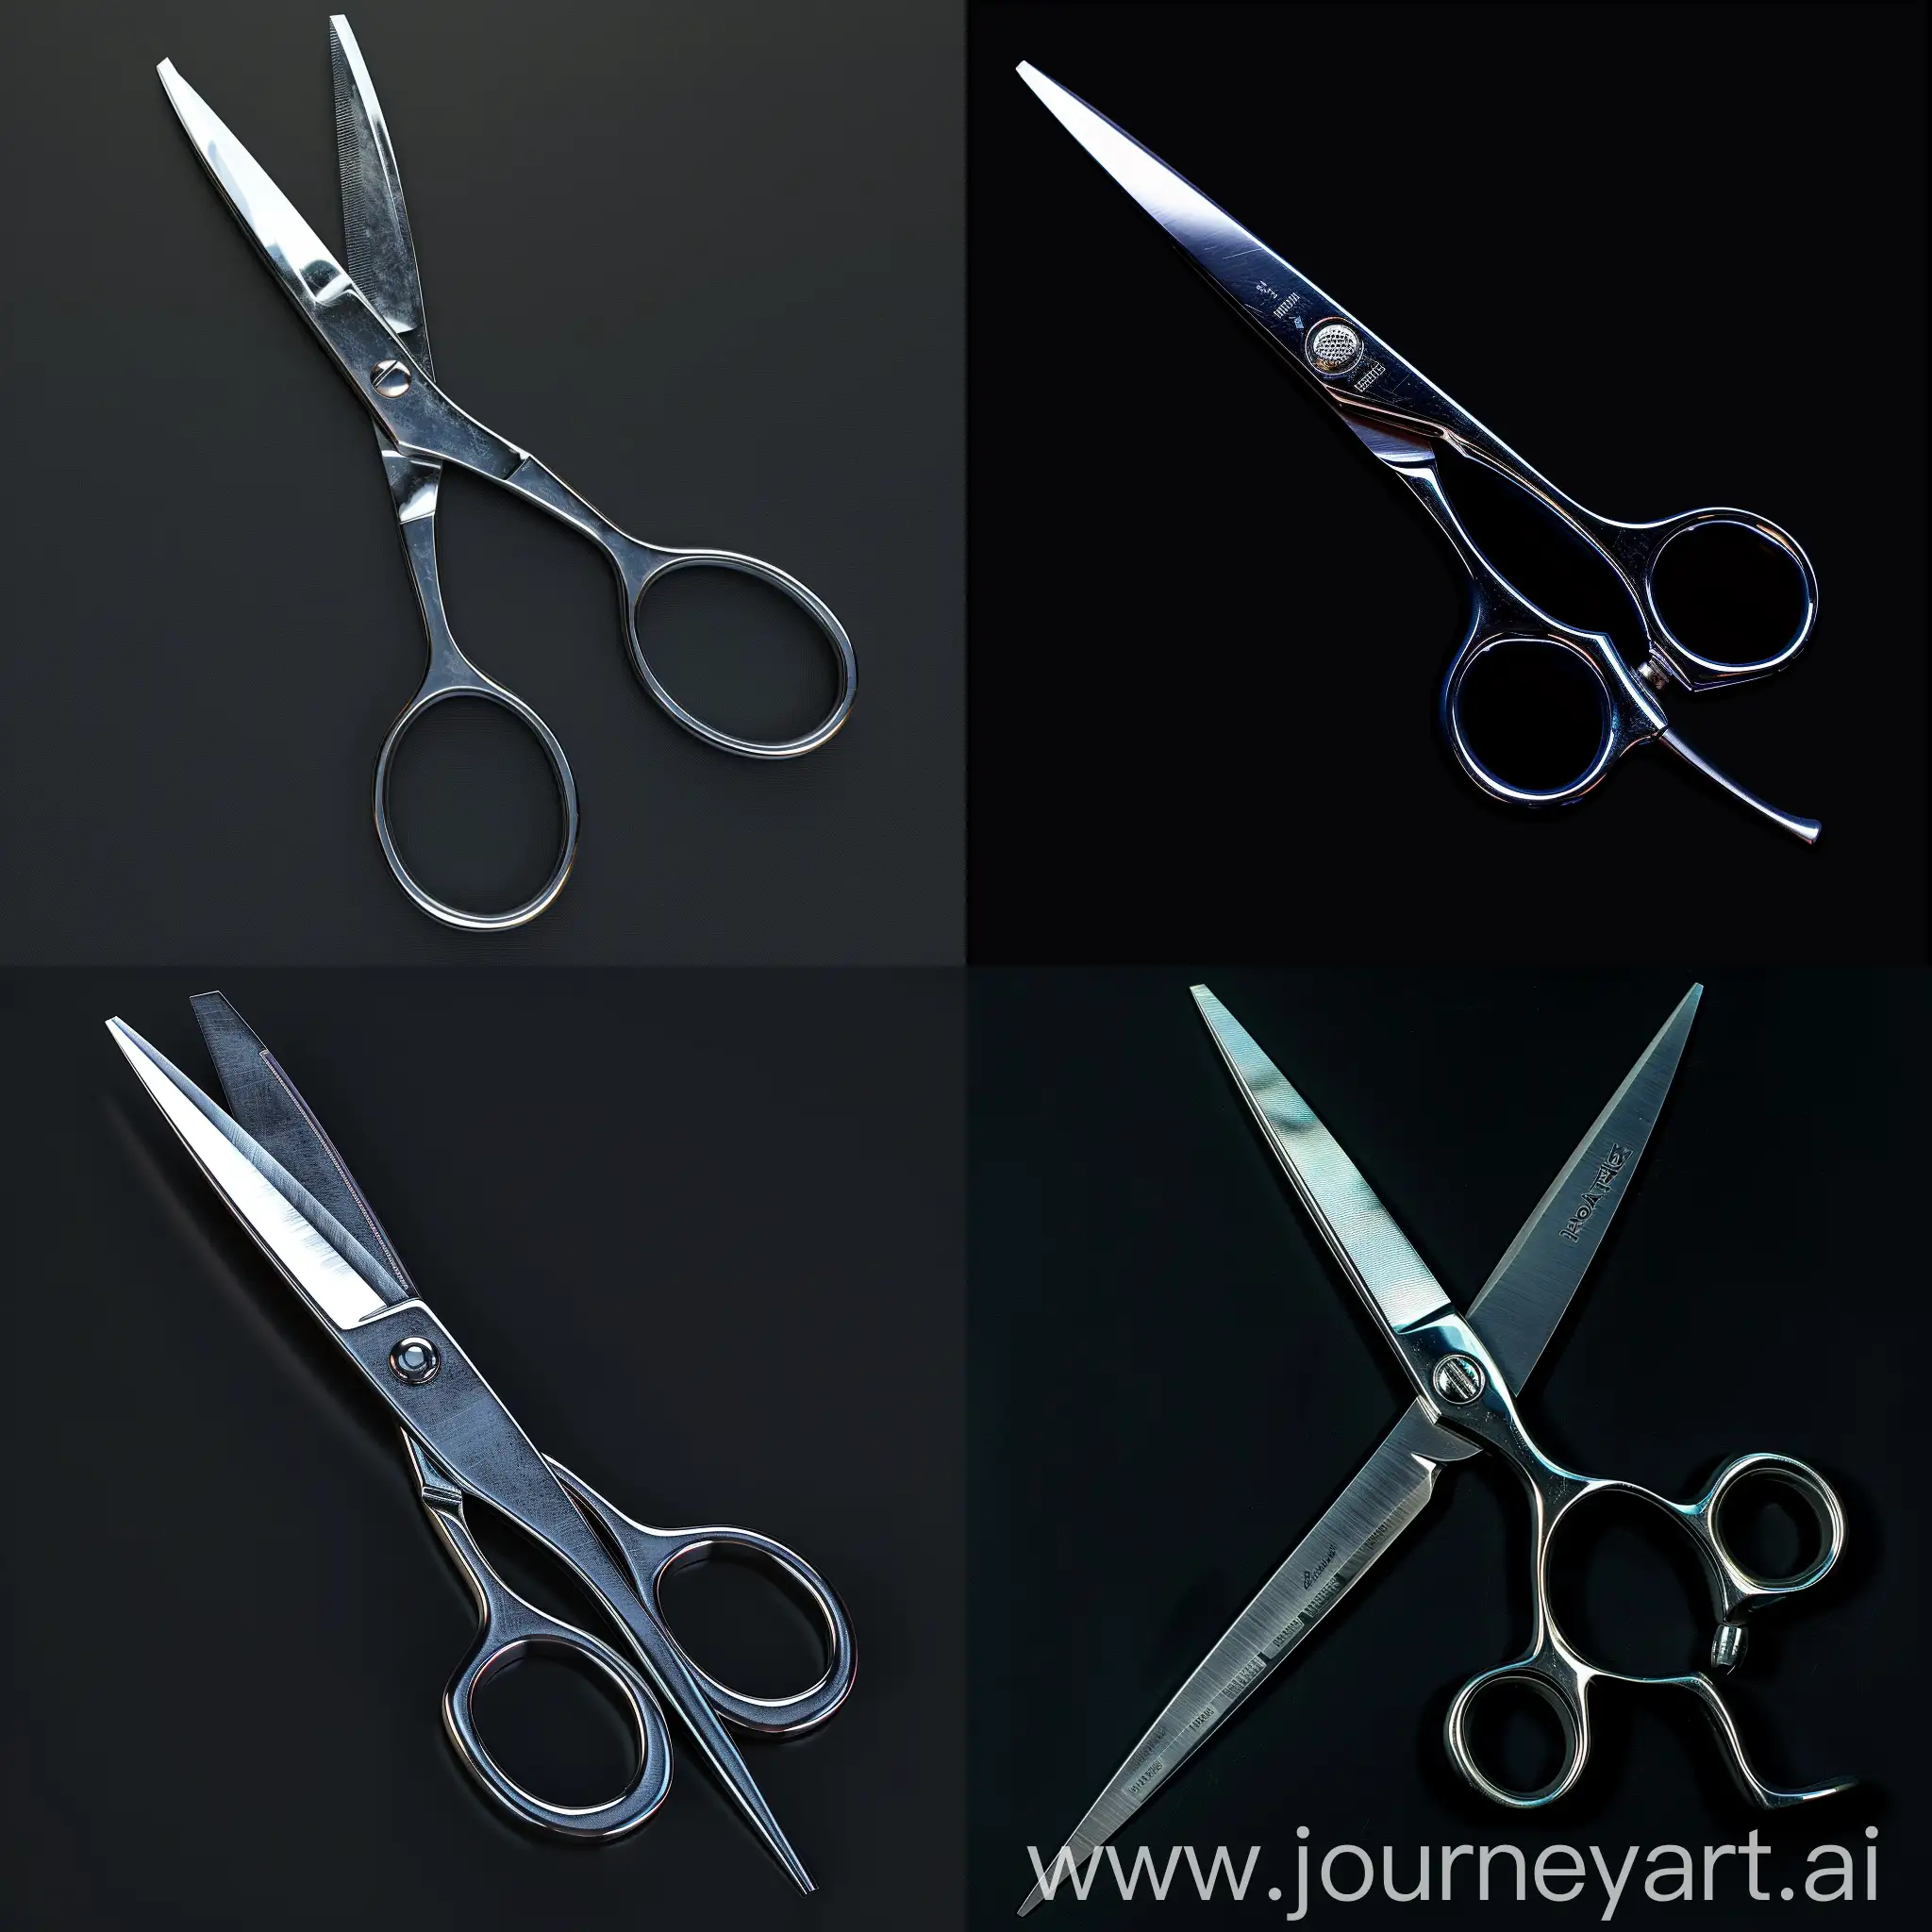 Realistic-Scissors-on-a-Reflective-Surface